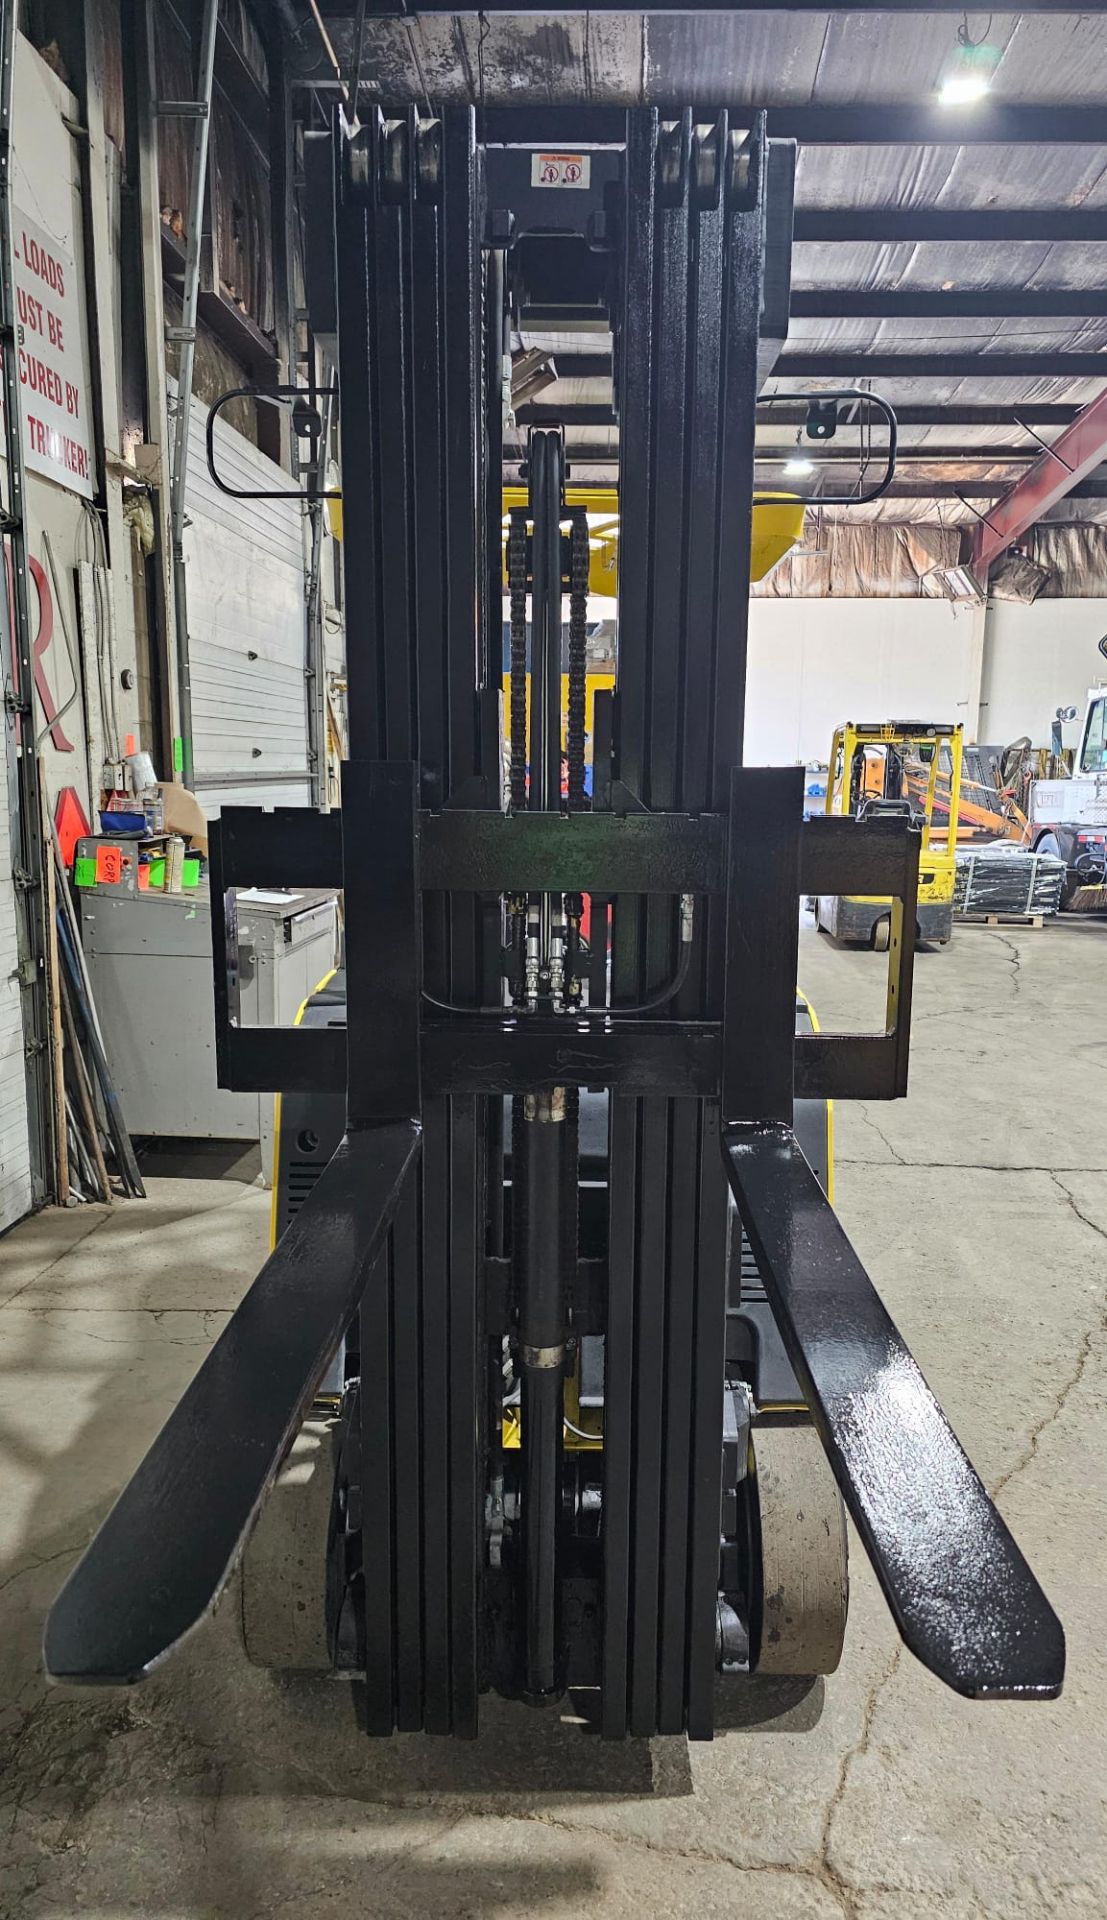 2018 Hyster 4,000lbs Capacity Stand-On Electric Forklift 36V sideshift 4-STAGE MAST 283" load height - Image 5 of 5